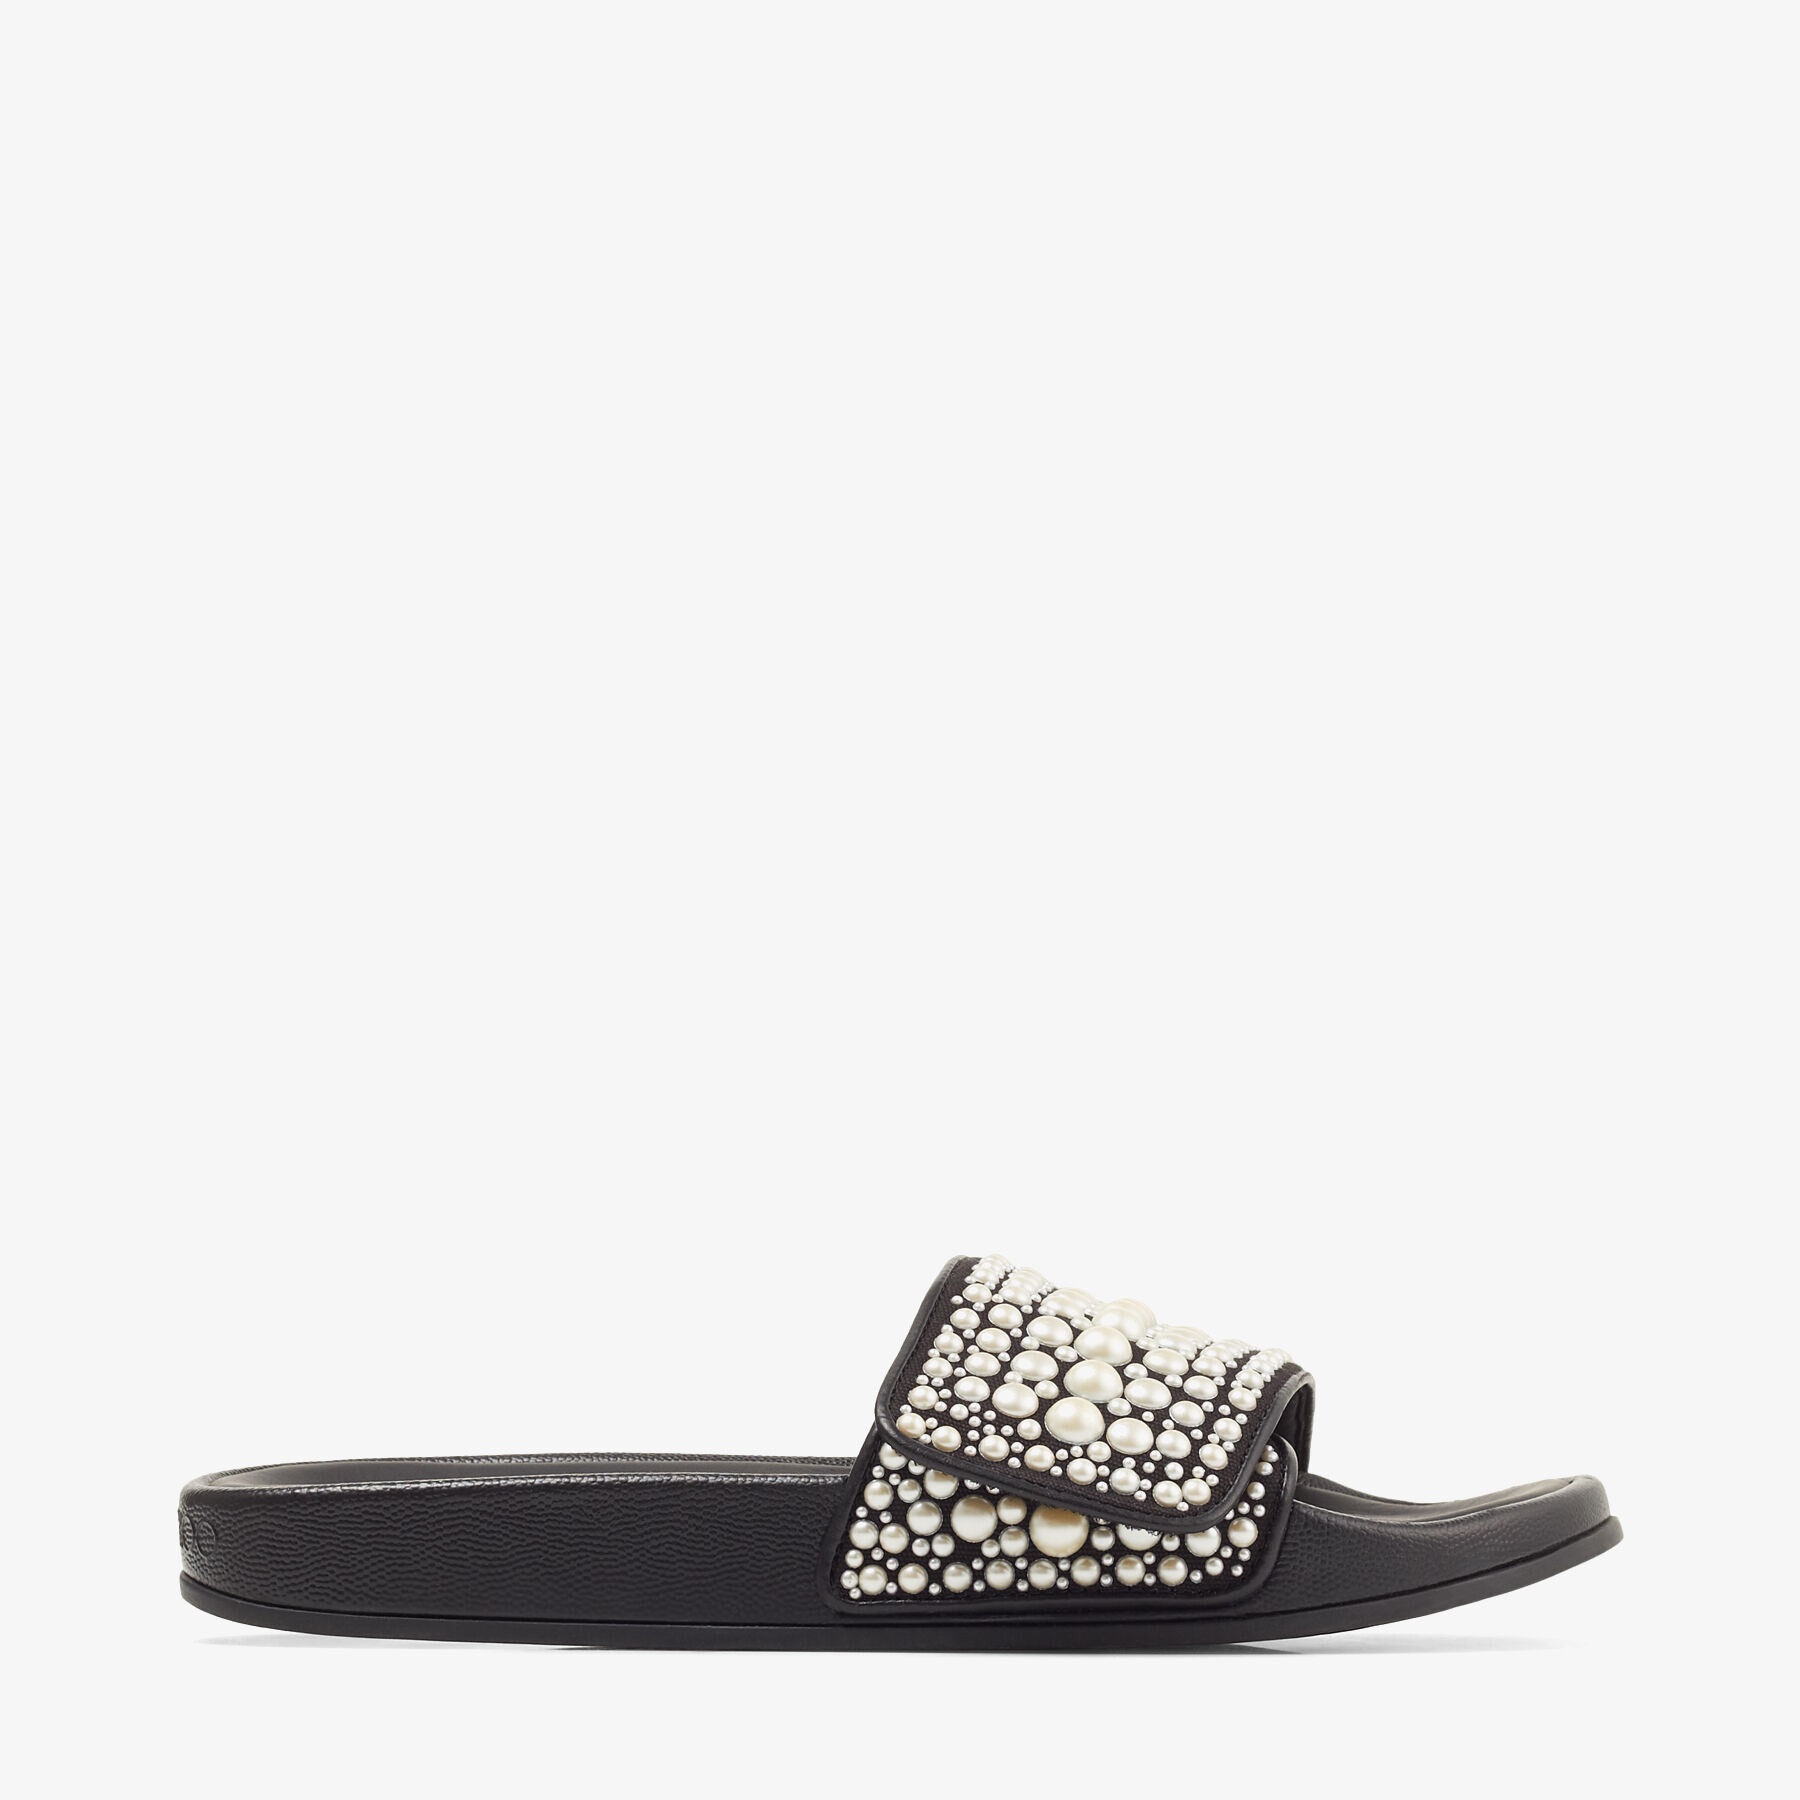 Fitz/F
Black Canvas and Leather Slides with Pearls - 1